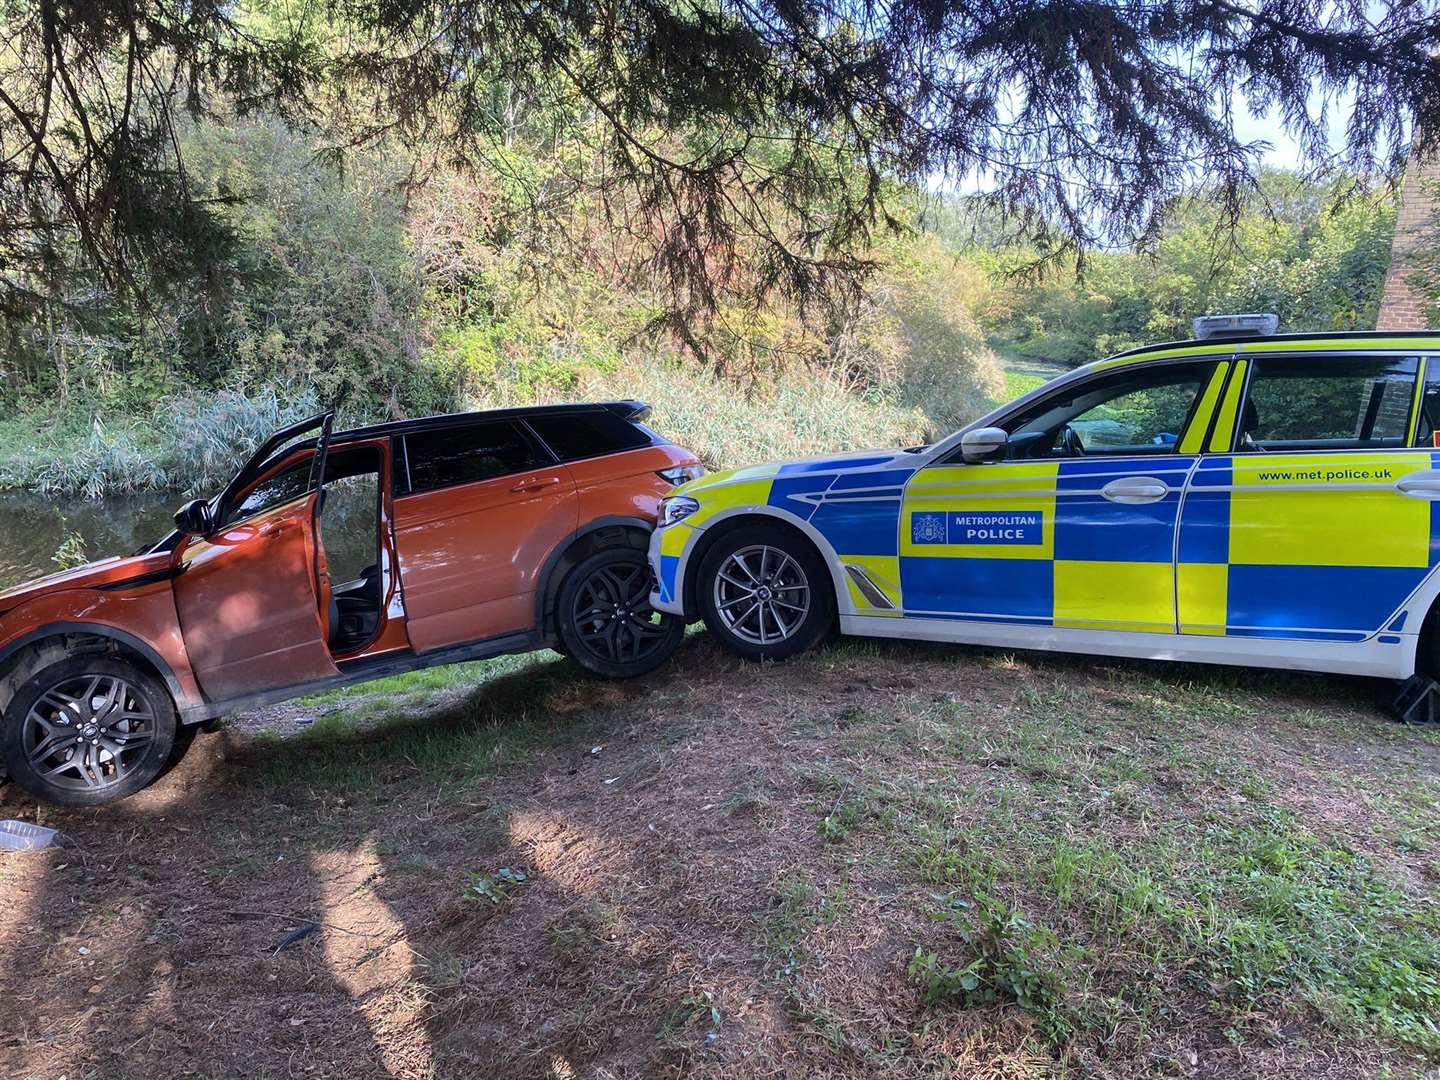 The Land Rover was reportedly involved in a police chase. Photo: Kent Police RPU